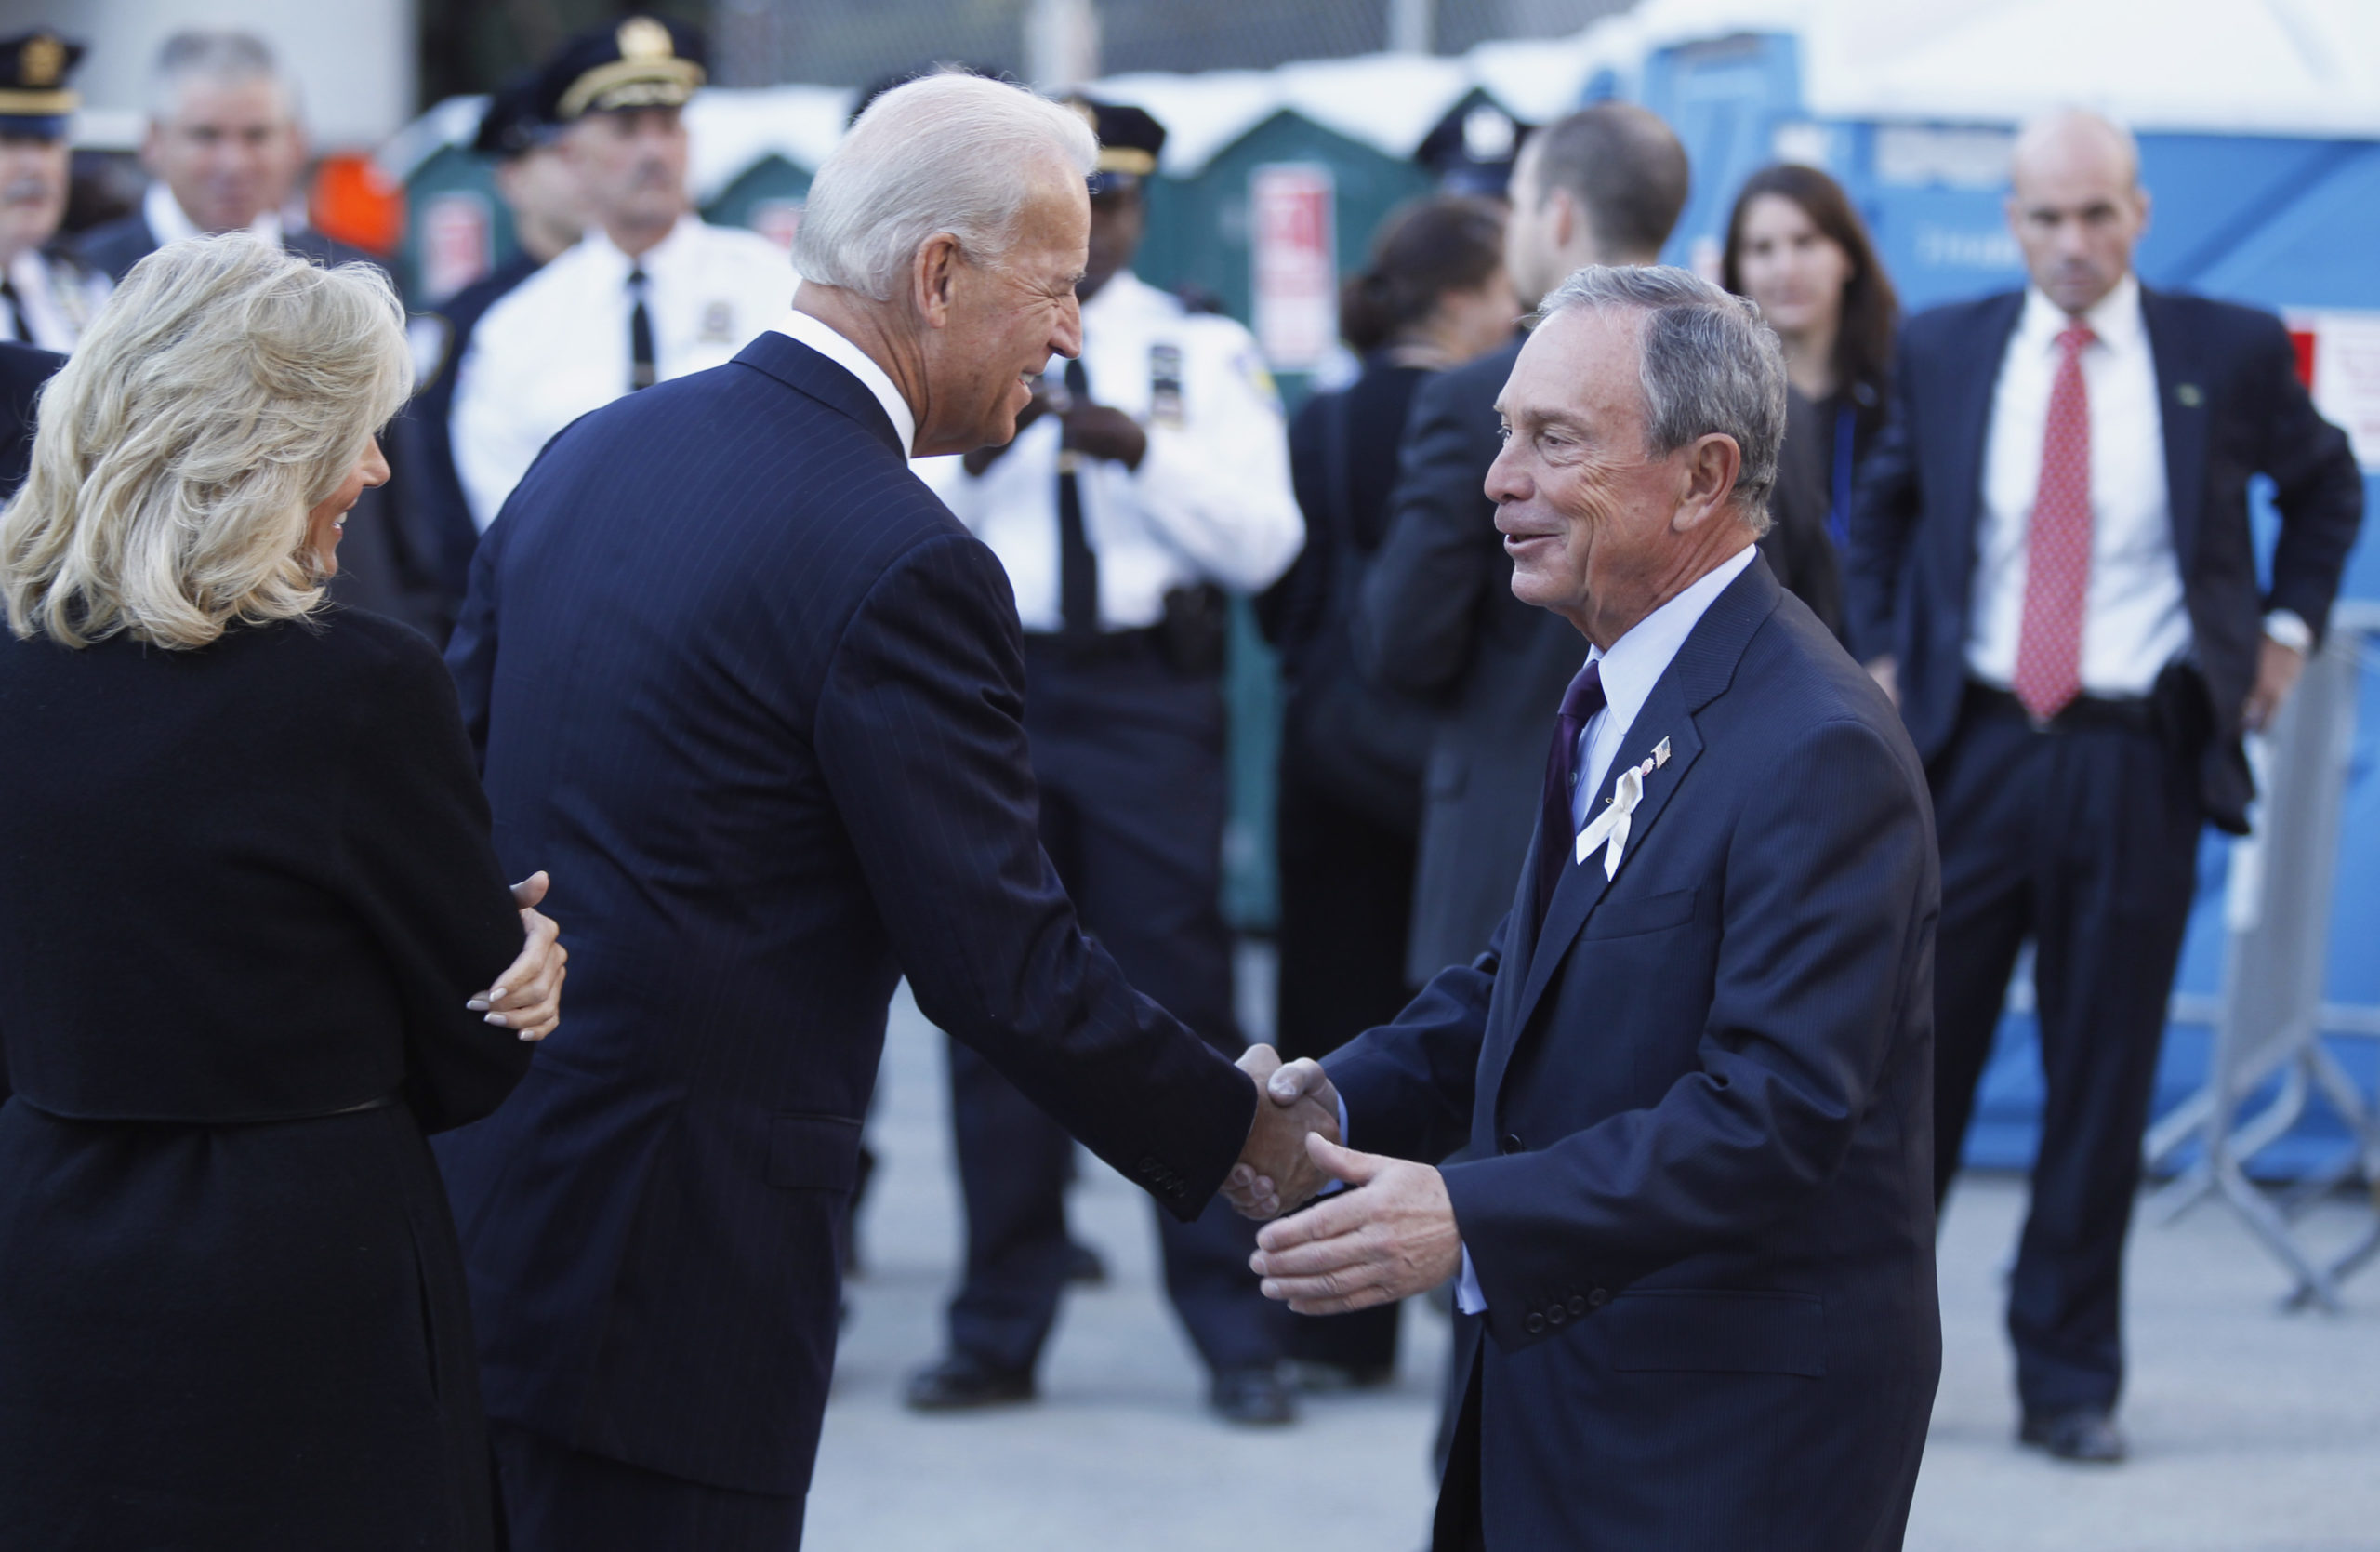 U.S. Vice President Joe Biden (L) greets New York City Mayor Michael Bloomberg at Ground Zero during the annual memorial service September 11, 2010 in New York City. Thousands will gather to pay a solemn homage on the ninth anniversary of the terrorist attacks that killed nearly 3,000 people on September 11, 2001. (Photo by Lucas Jackson-Pool/Getty Images)